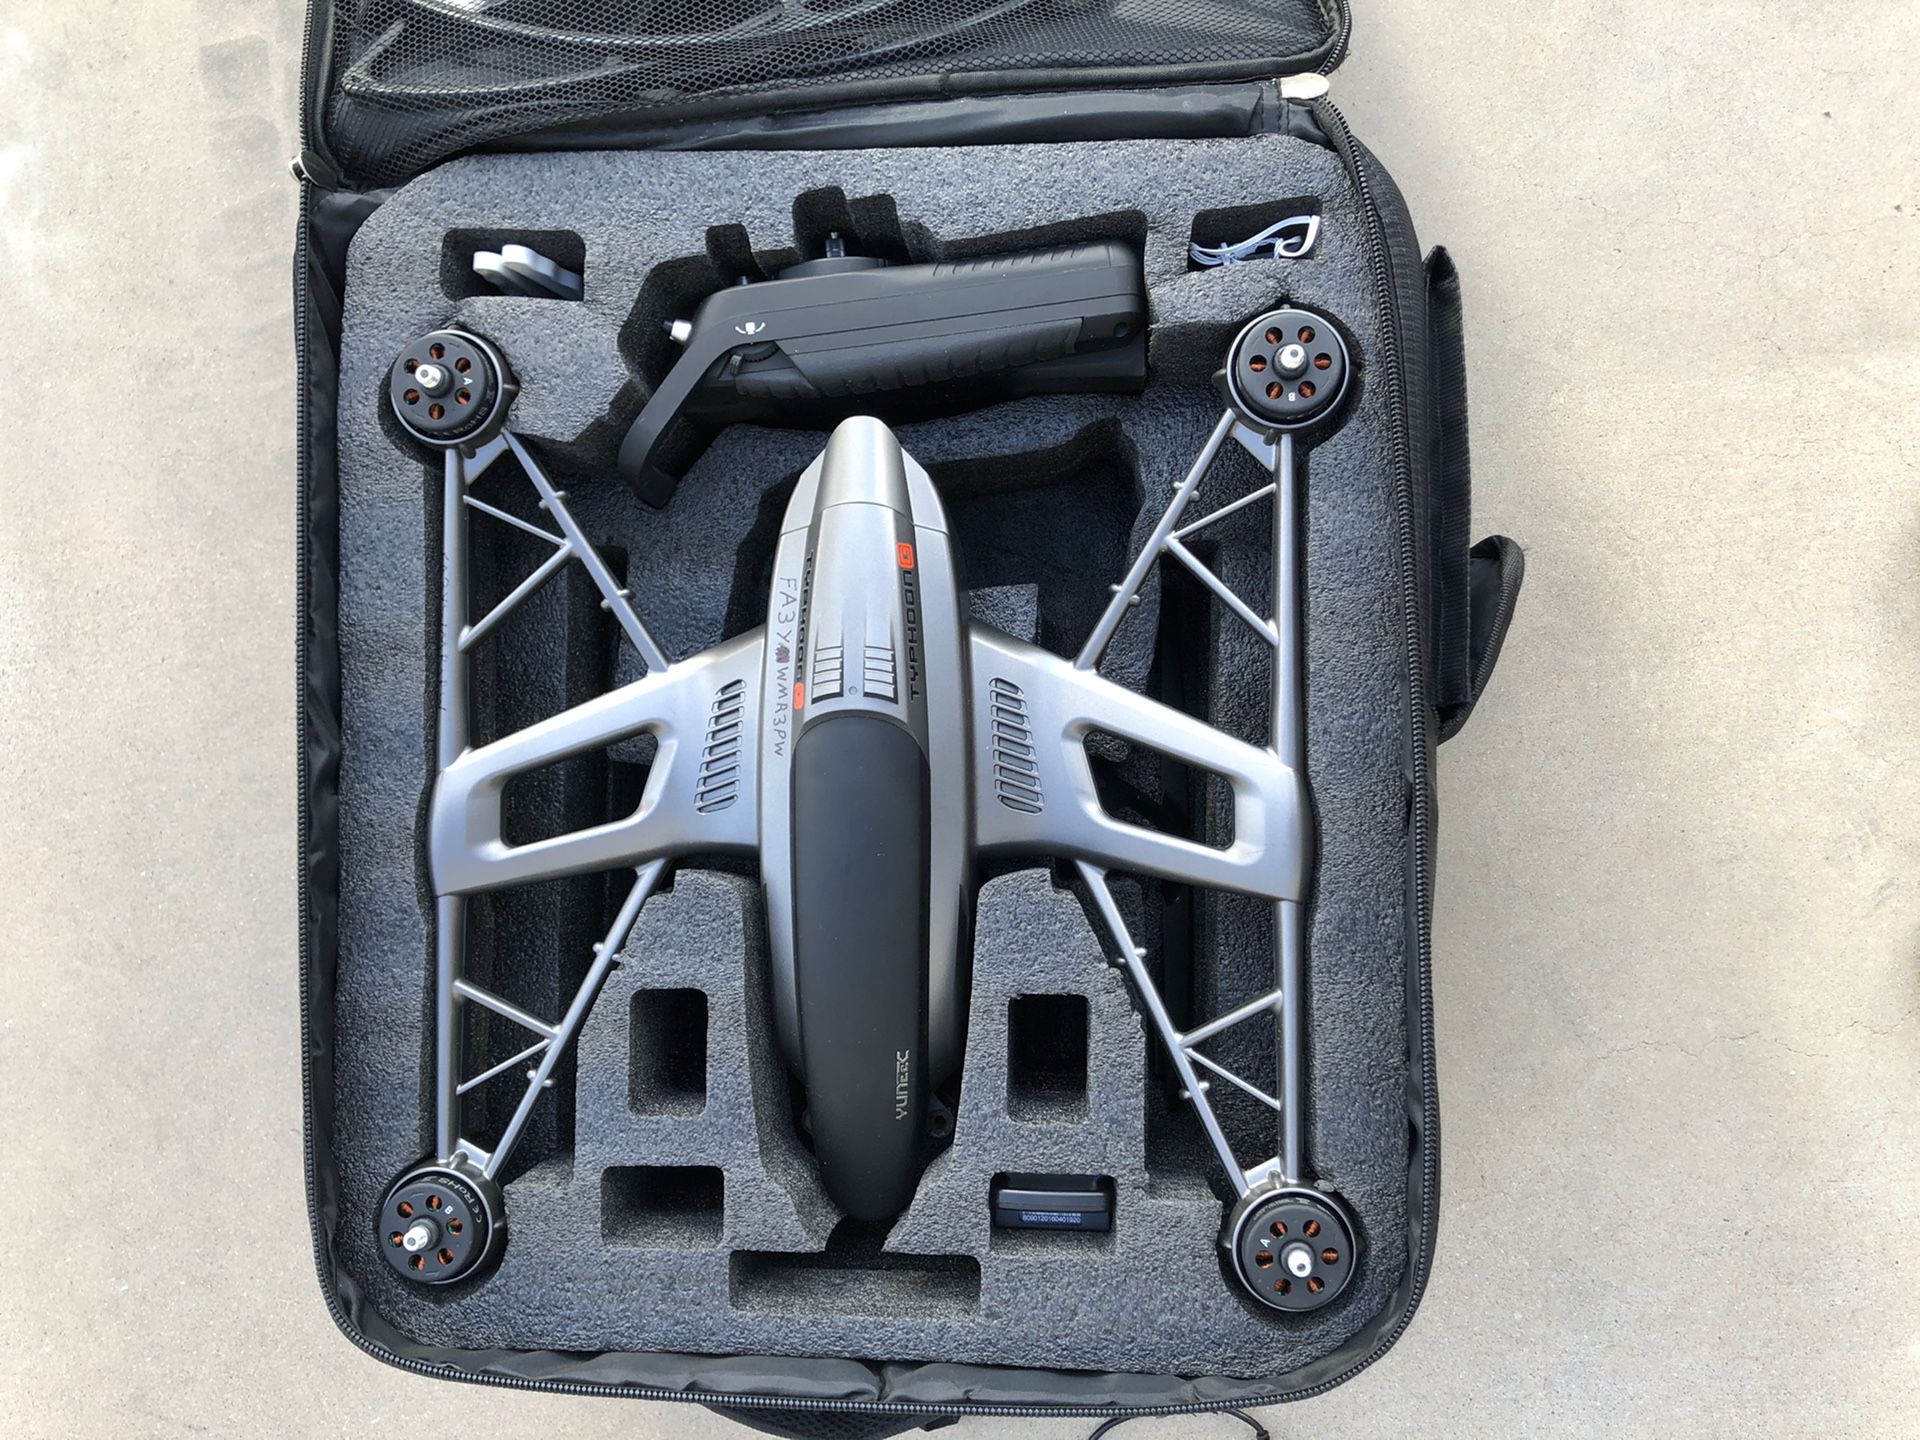 Yuneec Typhoon G Drone ready for new home works perfect